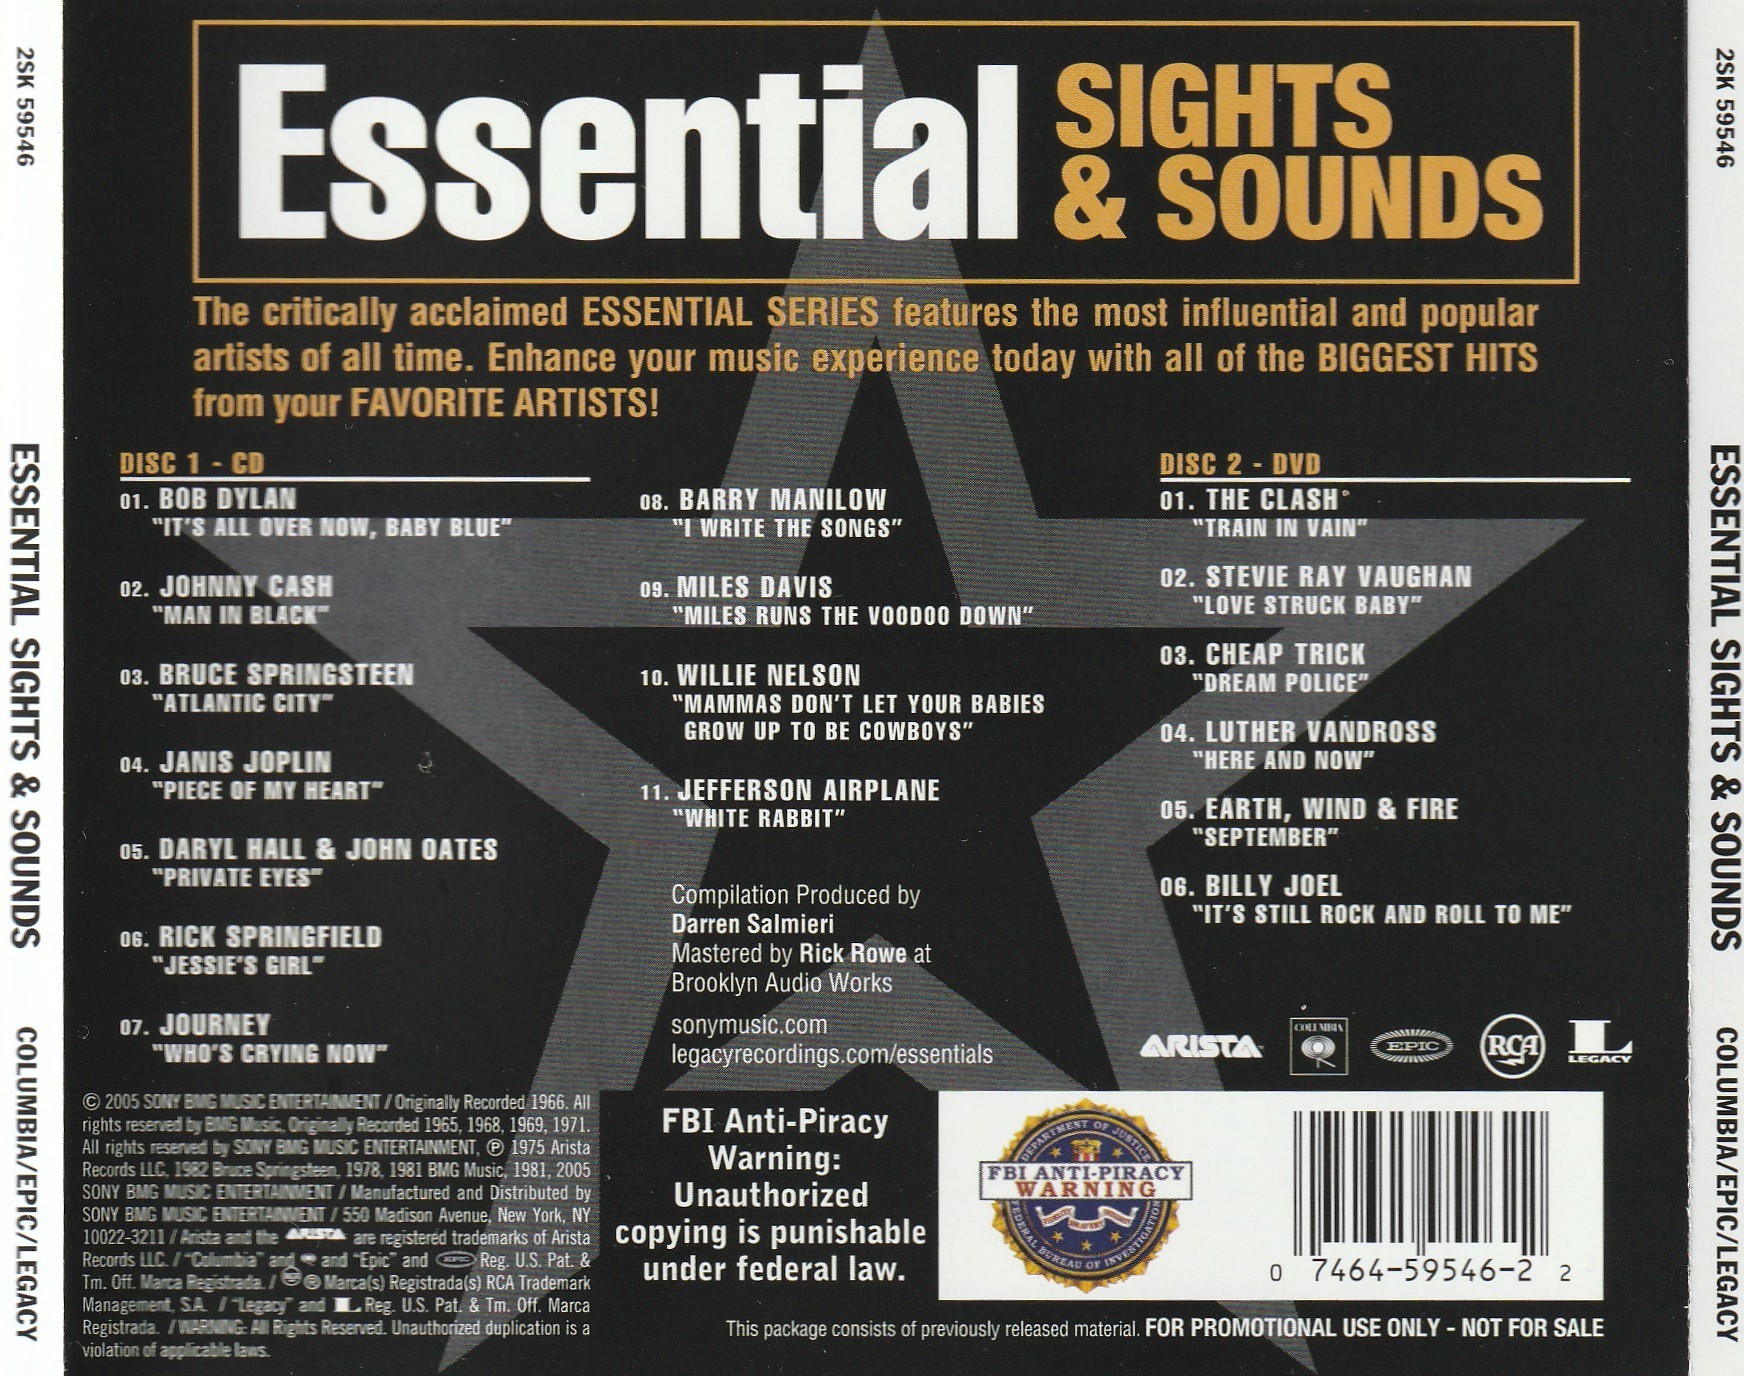 Stevie Ray Vaughan - Essential Sights and Sounds 2005